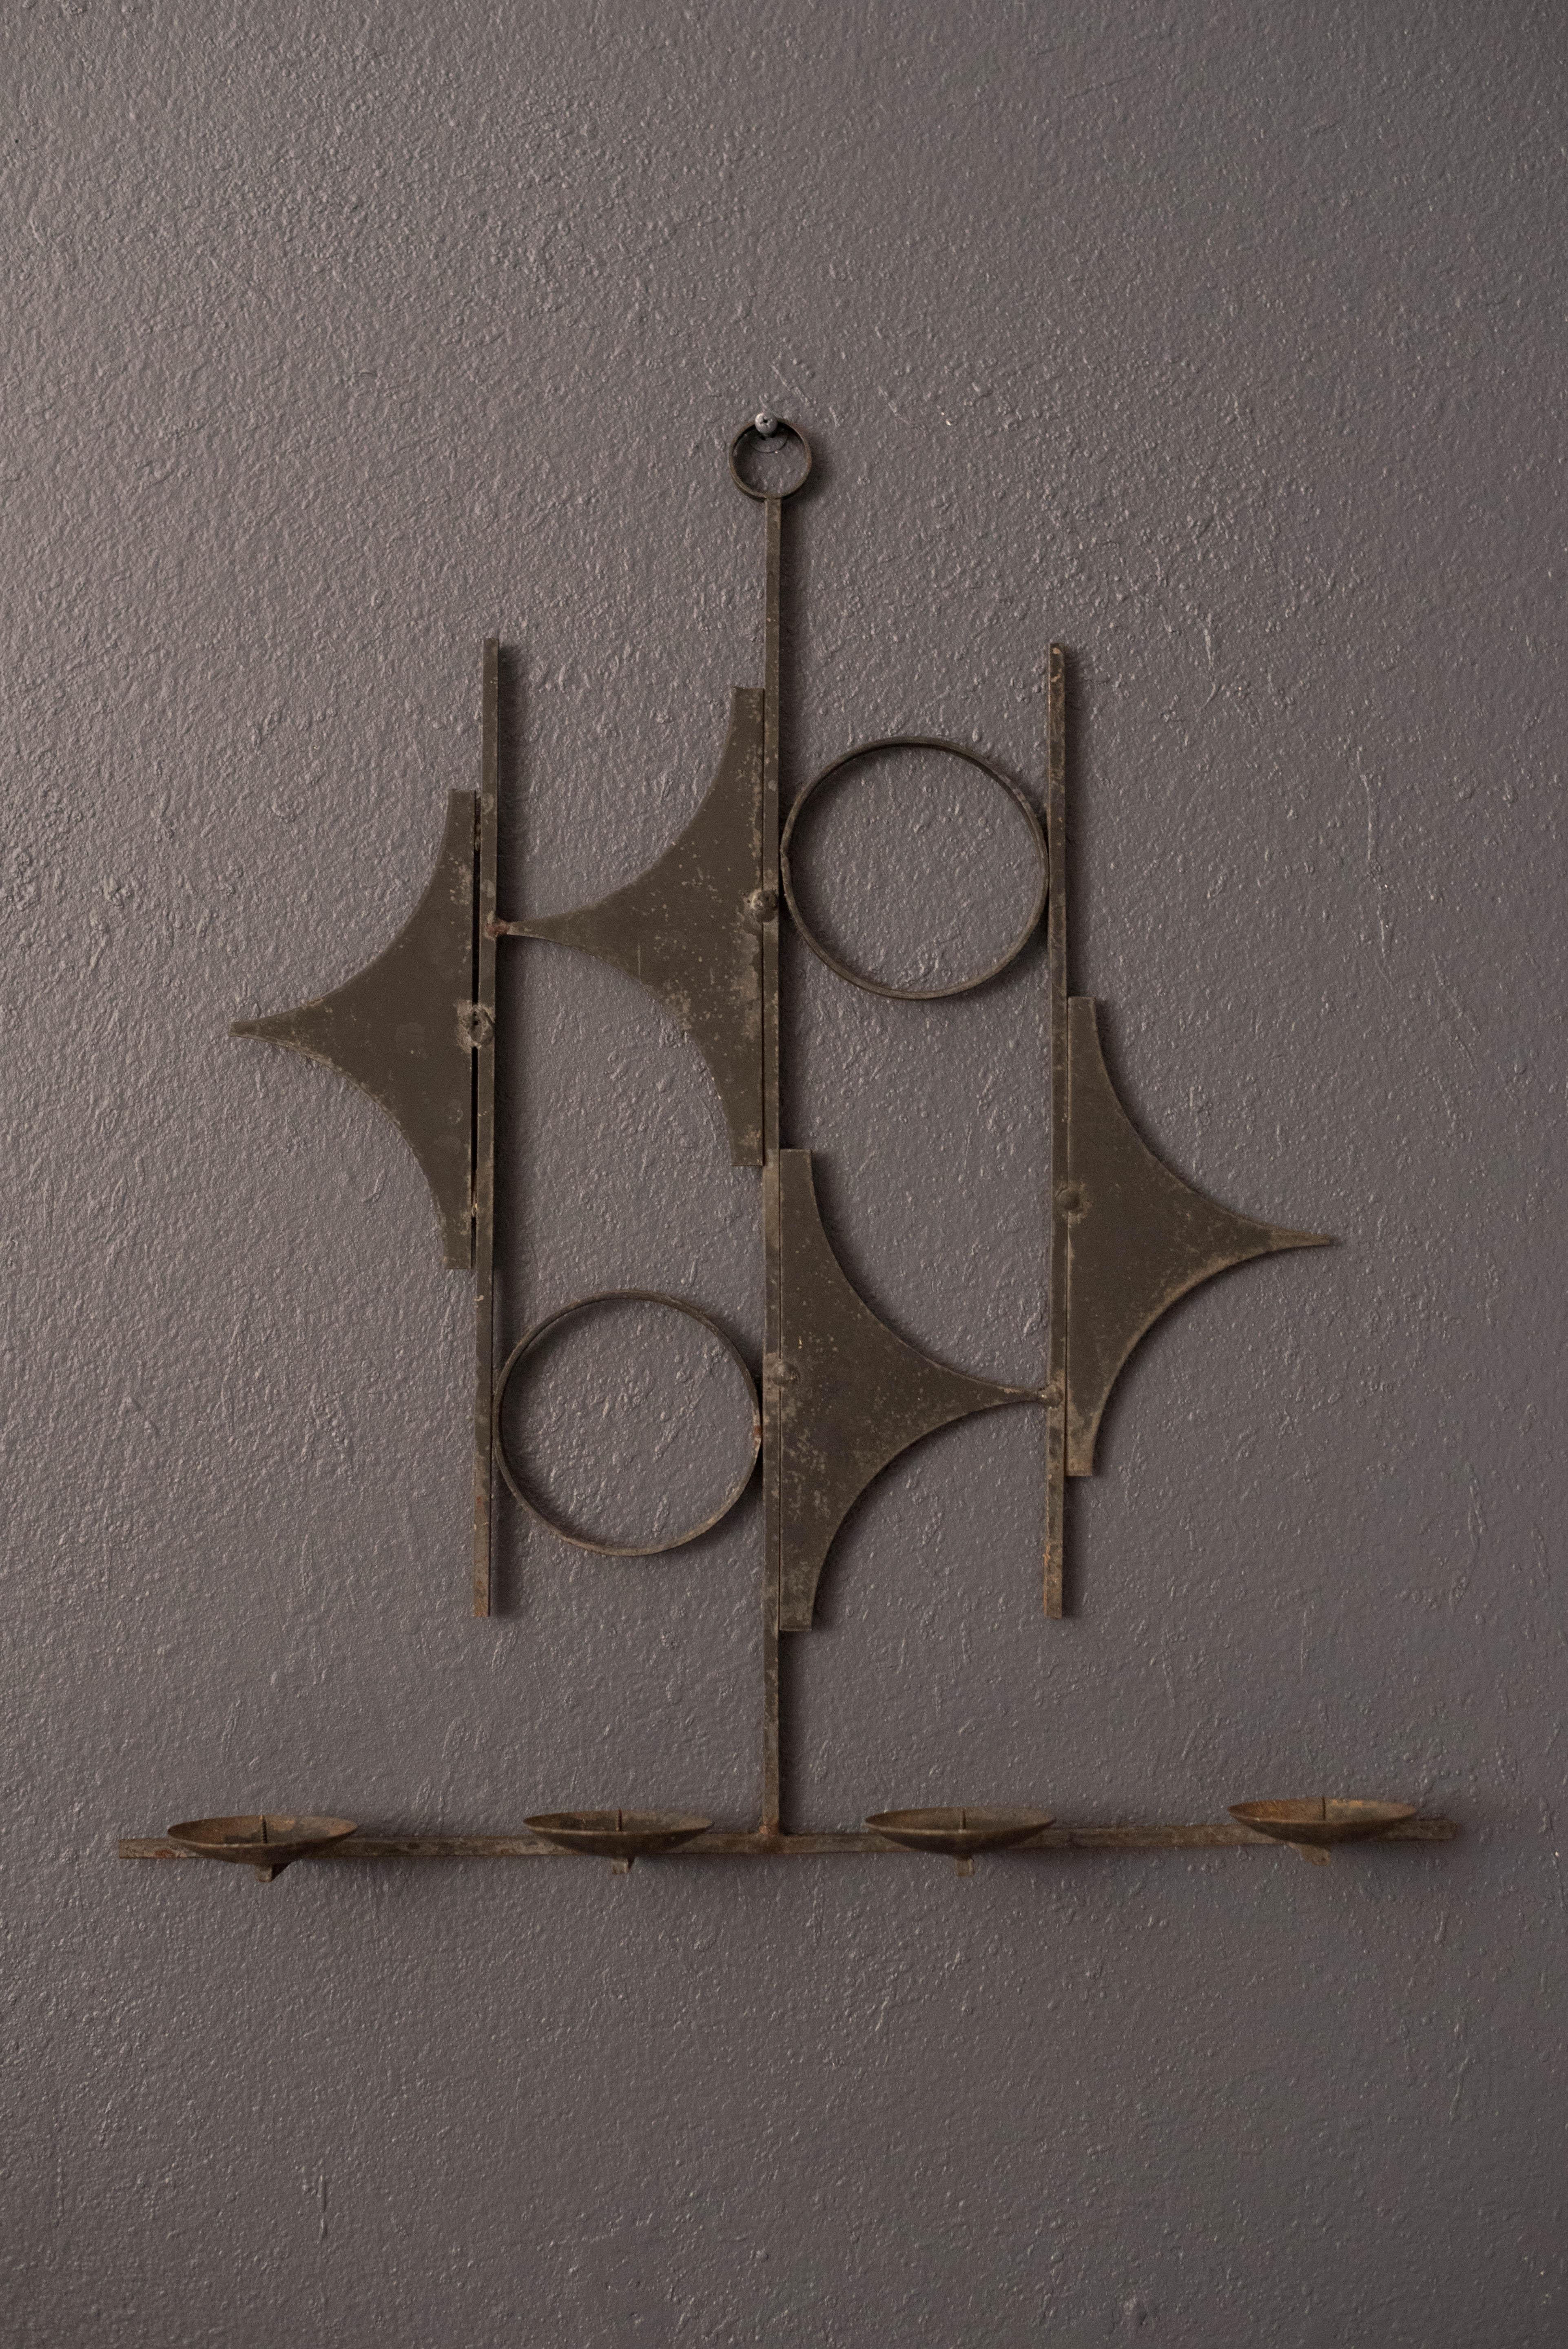 Spanish Colonial Vintage Spanish Abstract Iron Candle Wall Sconces